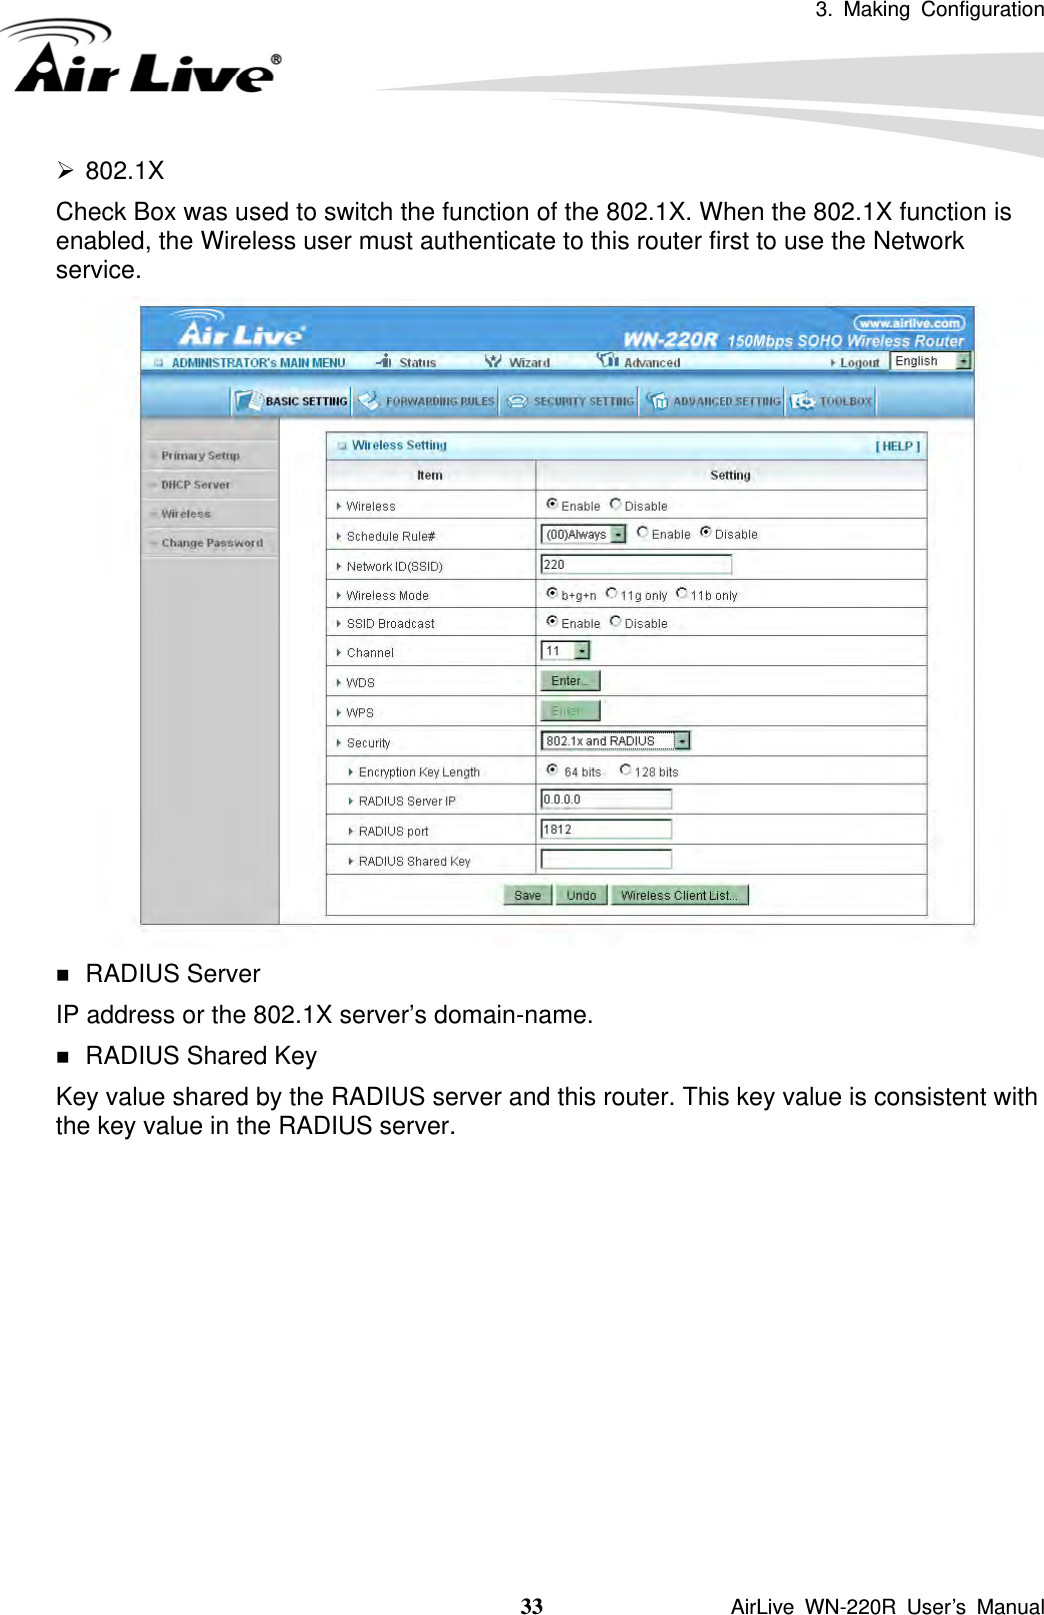 3. Making Configuration  33               AirLive WN-220R User’s Manual ¾ 802.1X Check Box was used to switch the function of the 802.1X. When the 802.1X function is enabled, the Wireless user must authenticate to this router first to use the Network service.    RADIUS Server IP address or the 802.1X server’s domain-name.    RADIUS Shared Key Key value shared by the RADIUS server and this router. This key value is consistent with the key value in the RADIUS server.           